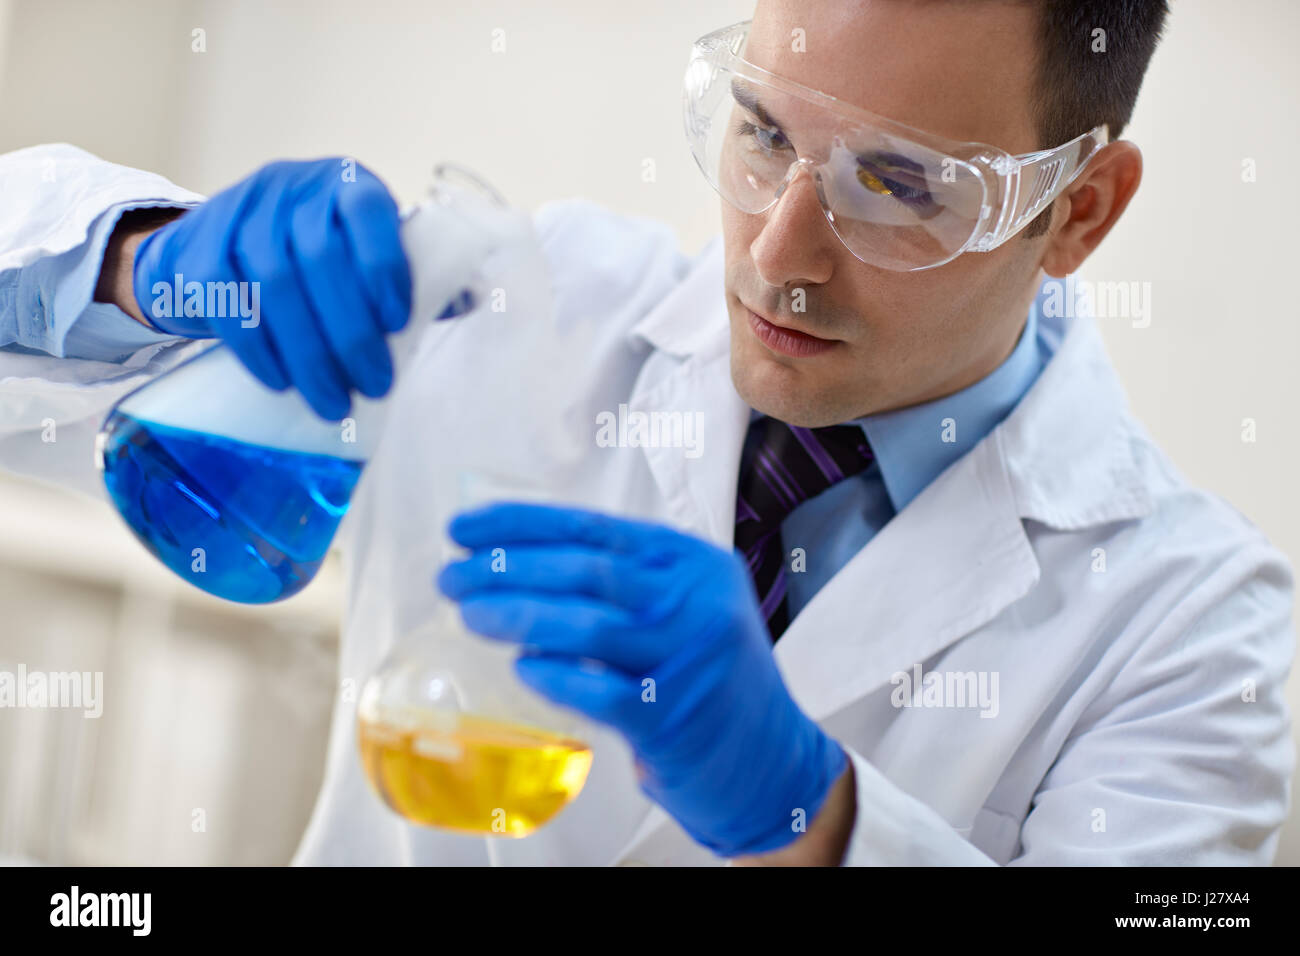 close up of young male scientist with flask making test or research in chemical laboratory Stock Photo